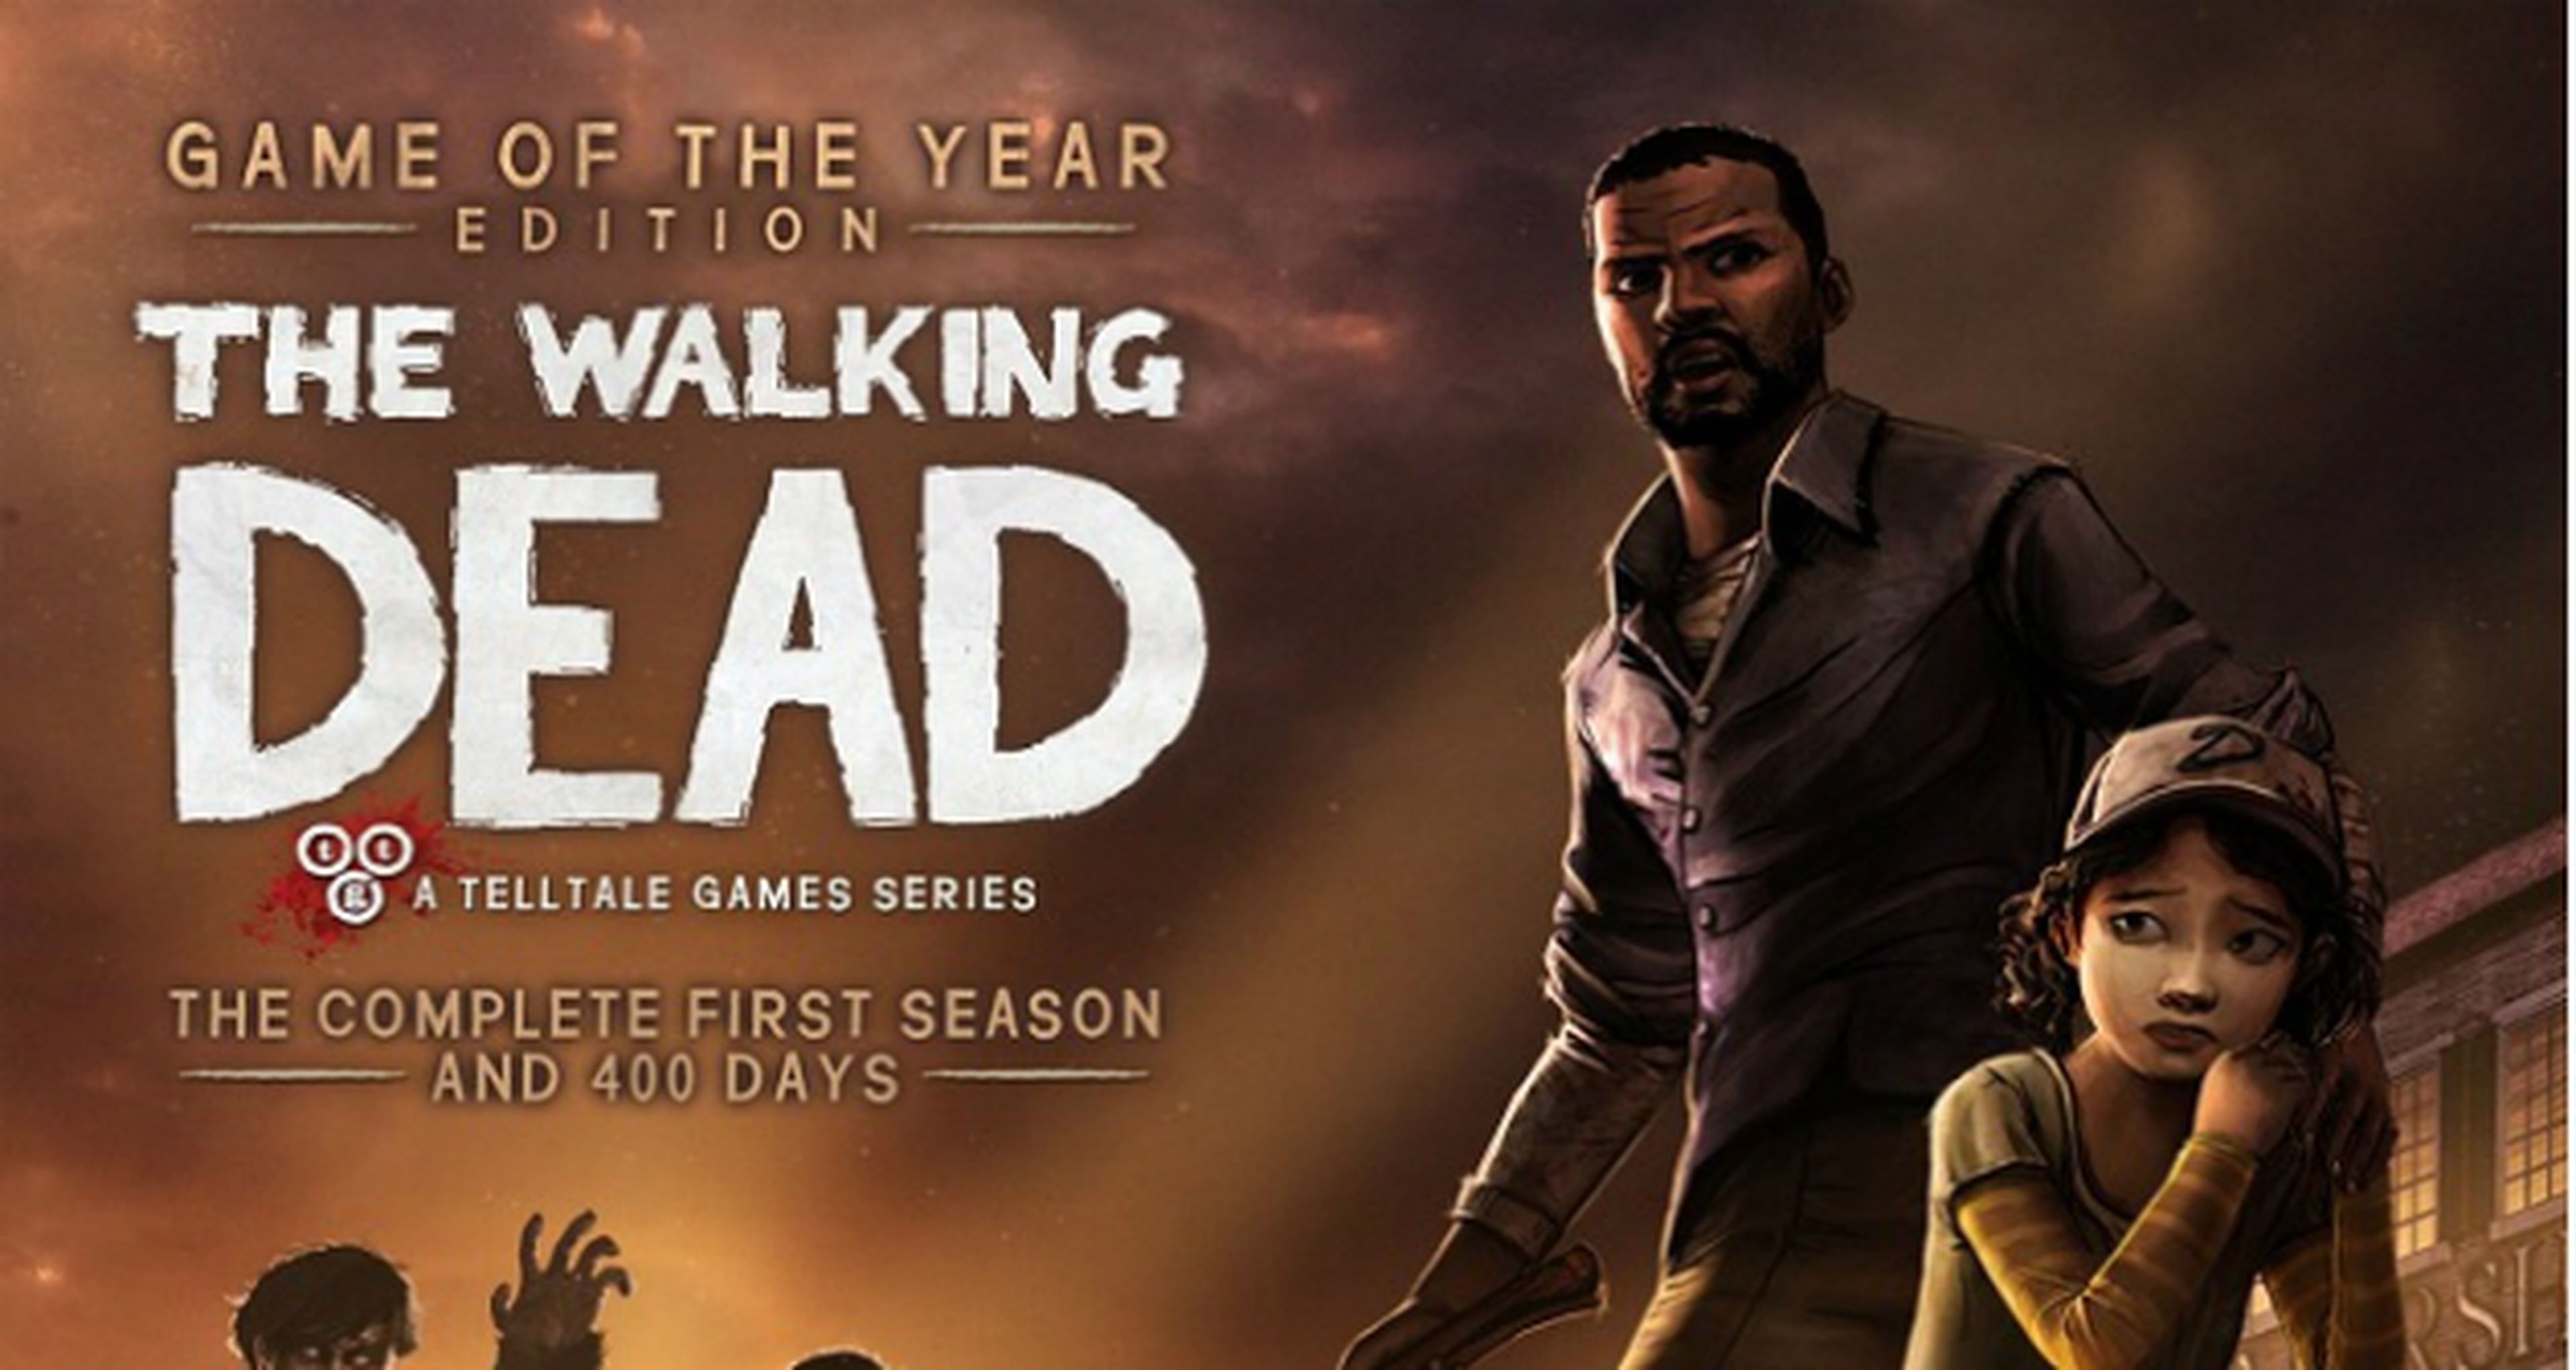 The Walking Dead Game of the Year Edition podría llegar a PS4